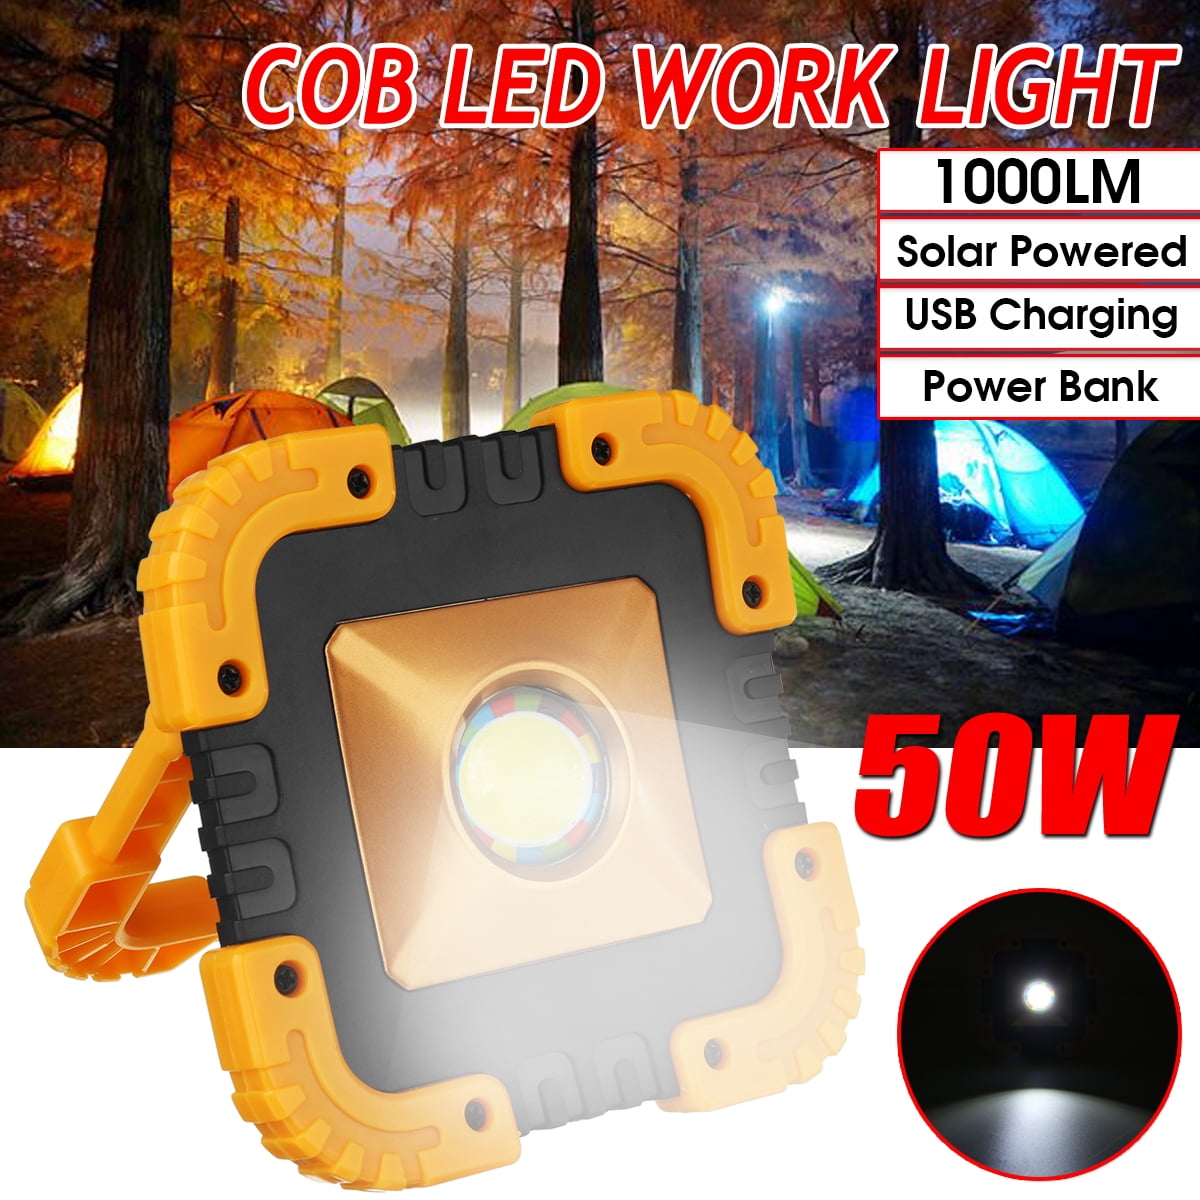 1pc 50w 1000lm Solar Cob Work Light Rechargeable Led Work Check Light